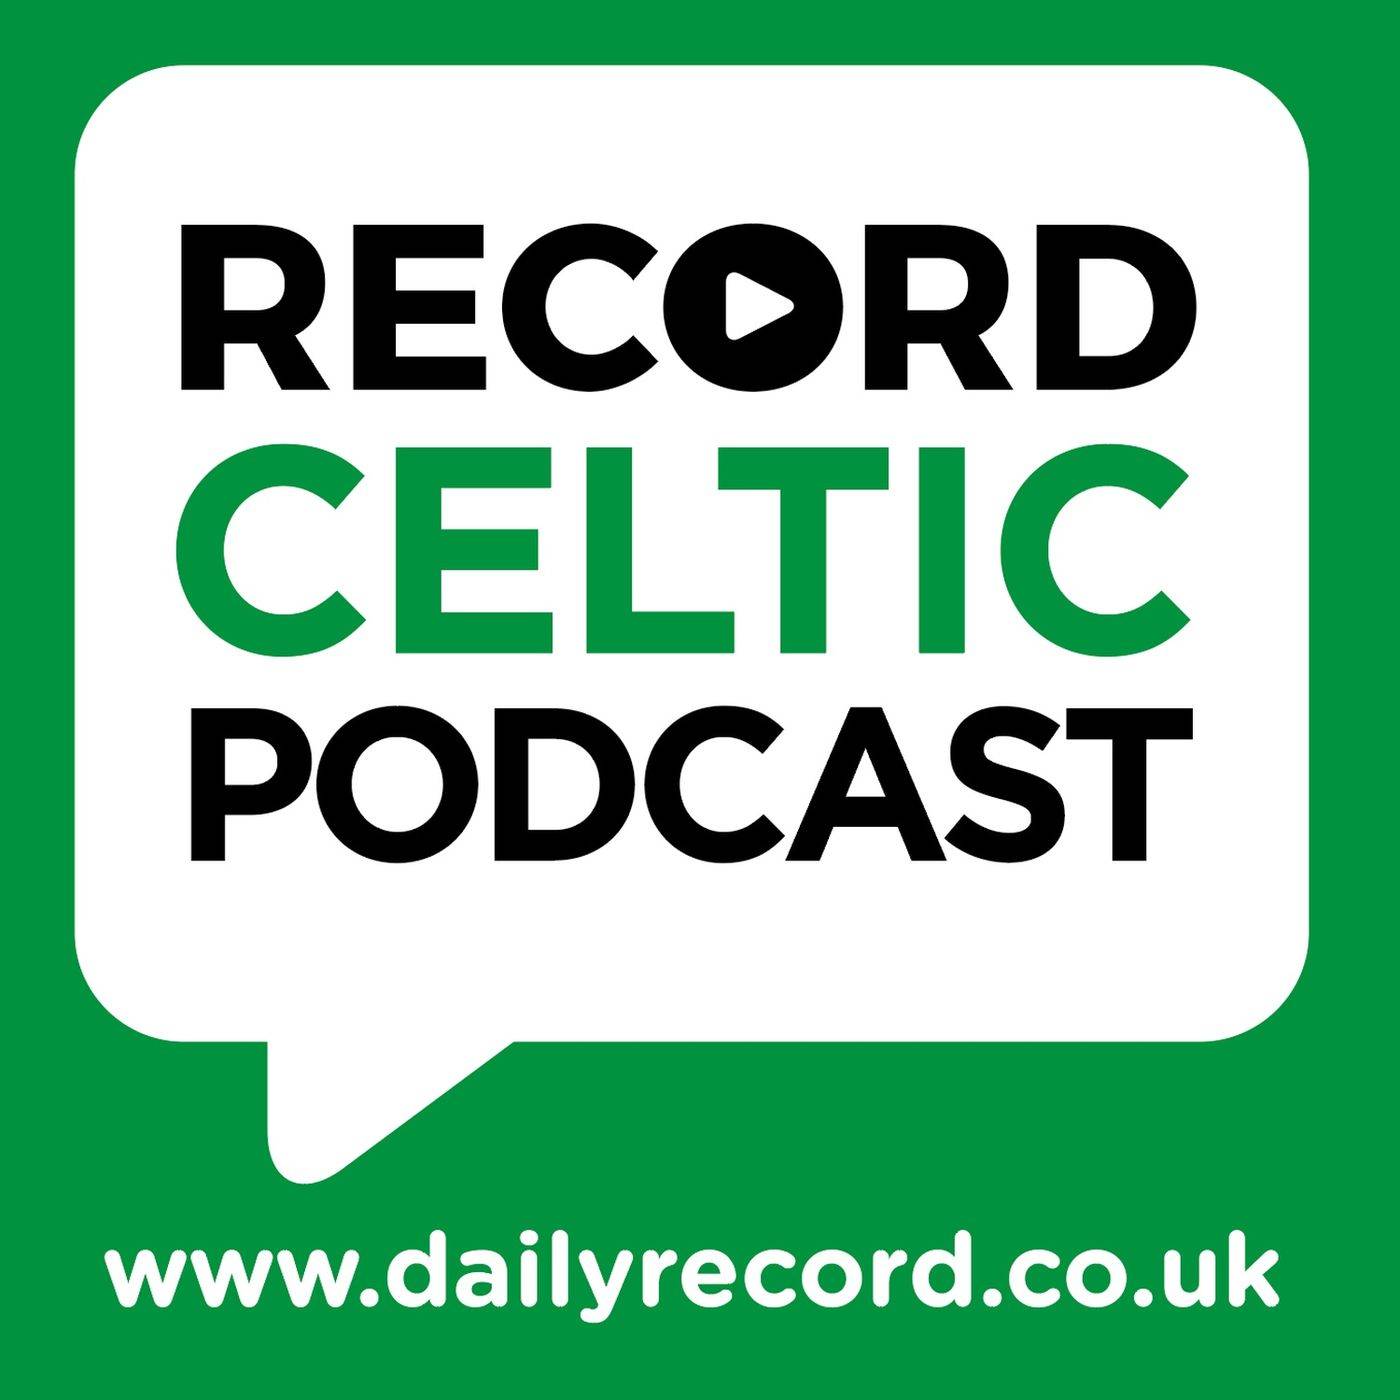 Does Mikey Johnston deserve a new deal? | Is Oh the real deal? | Phillips won’t be a Celt much longer